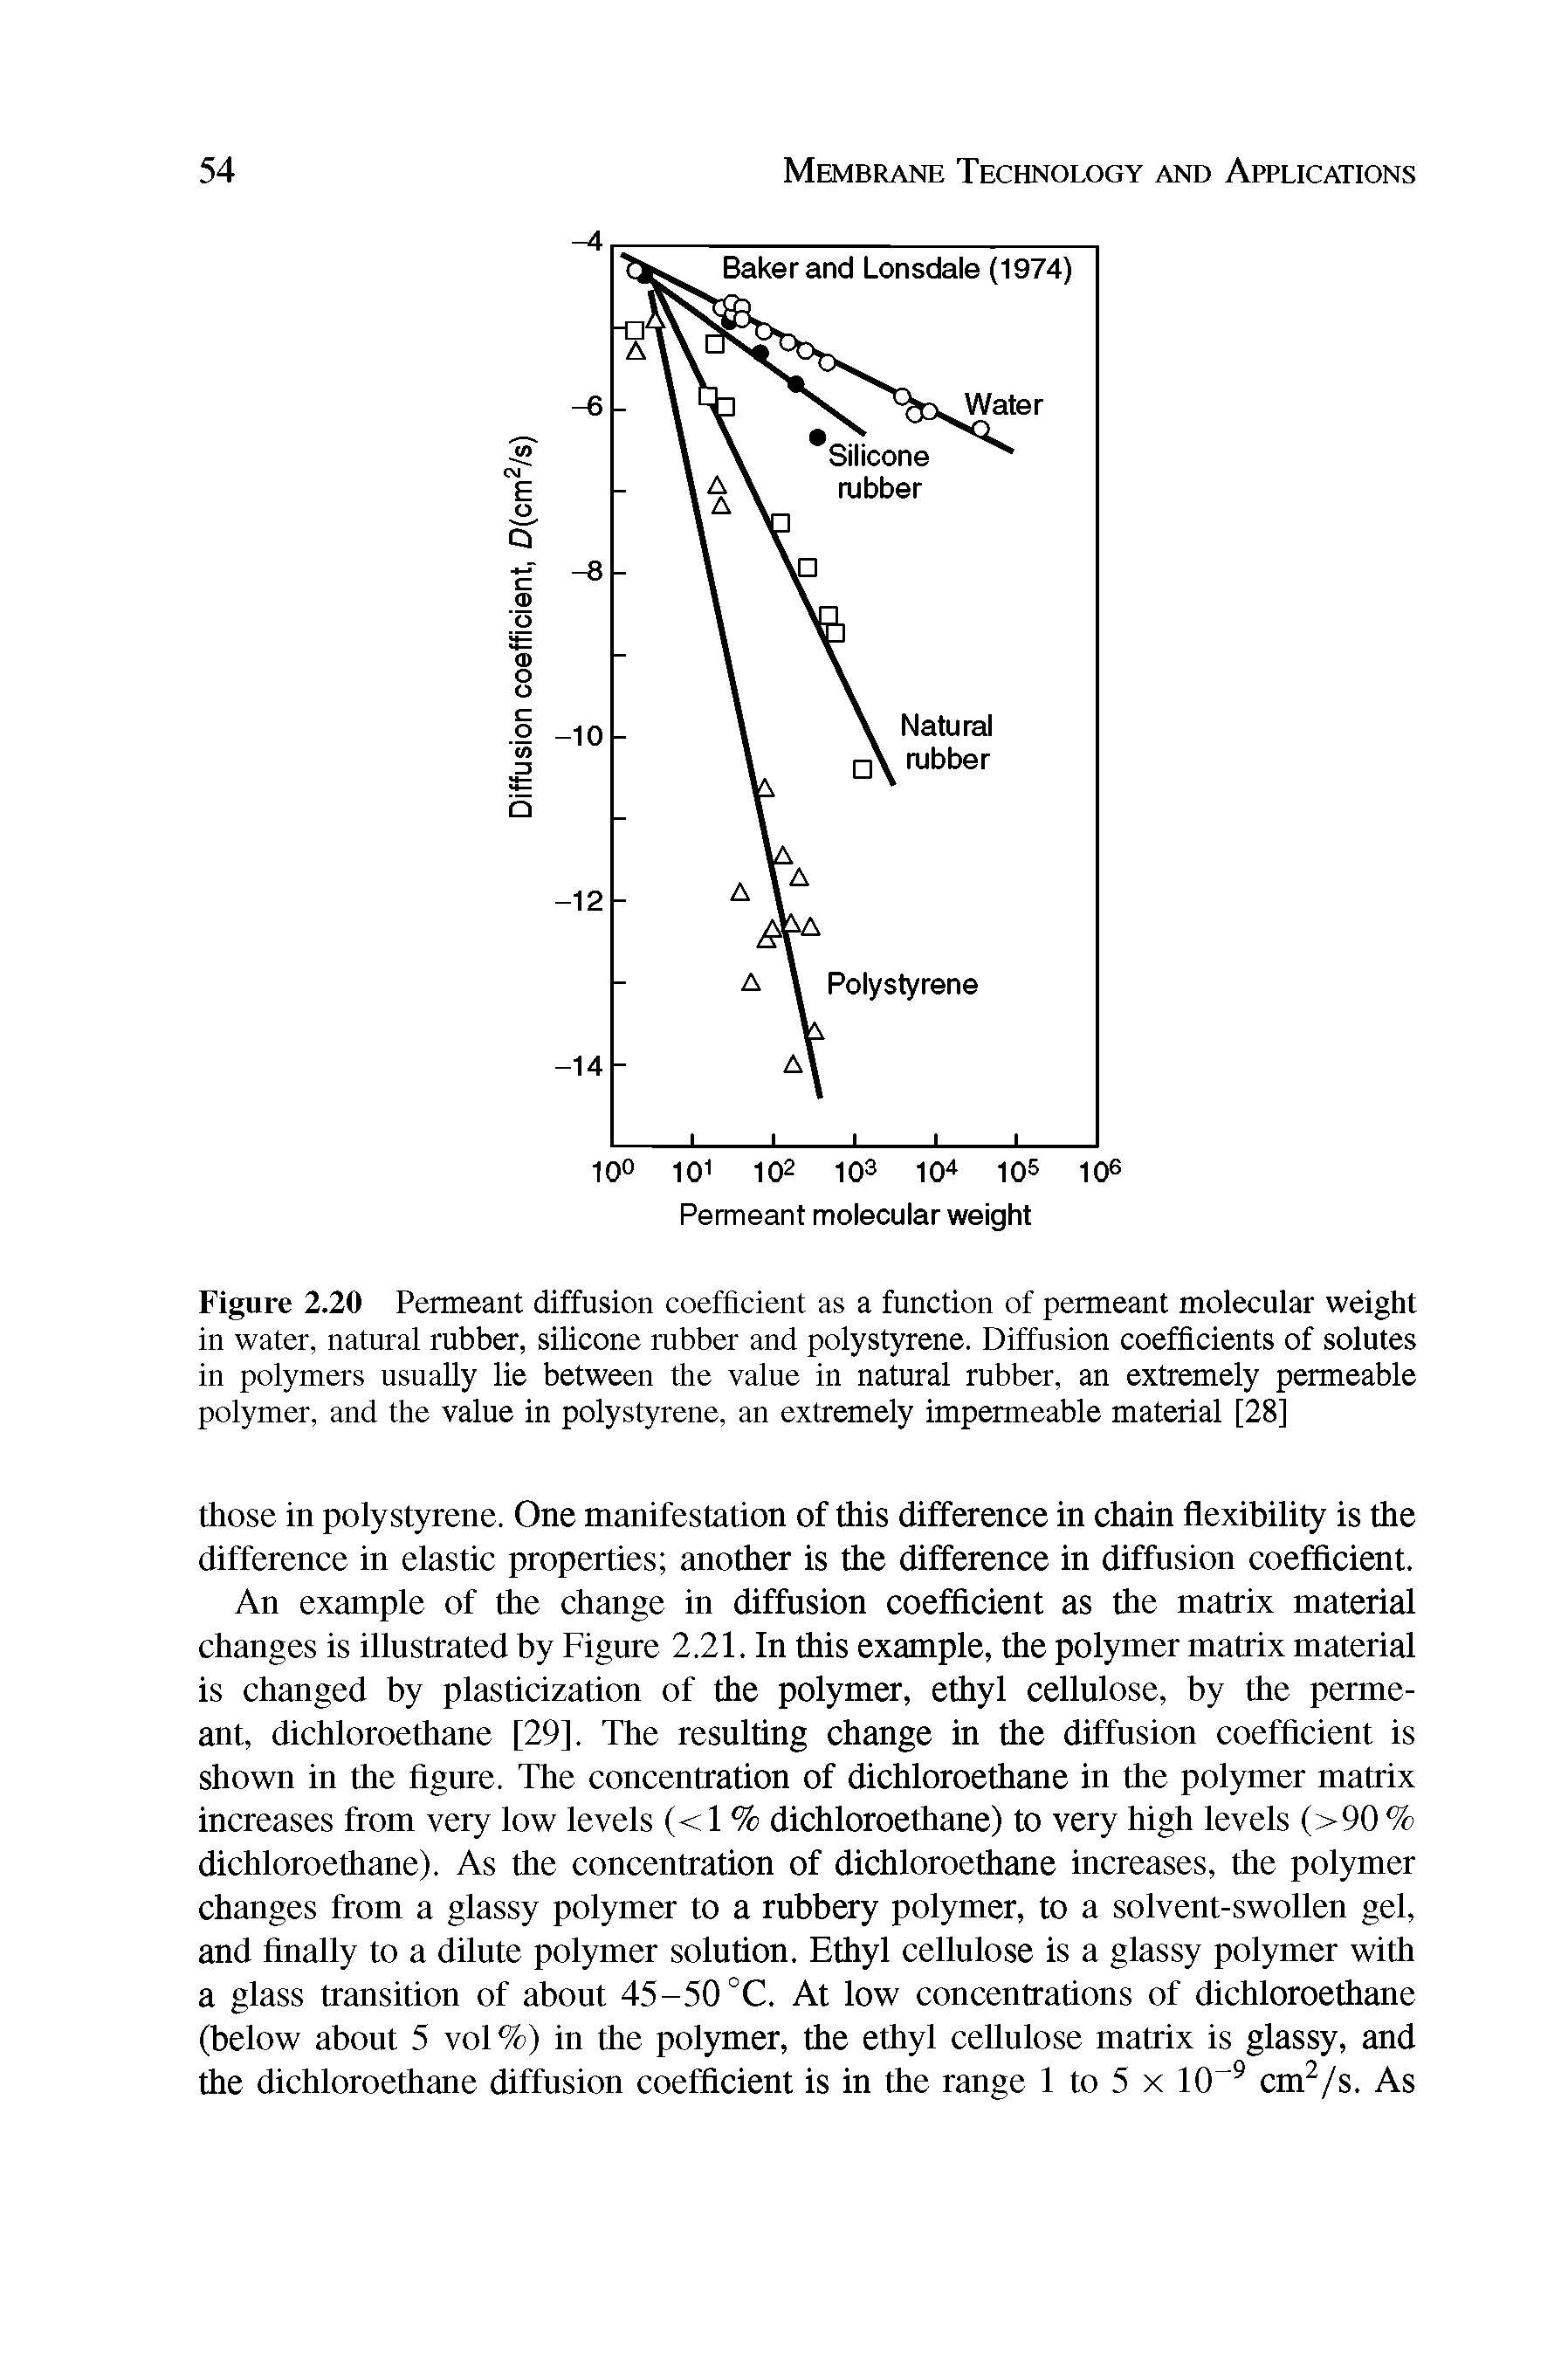 Figure 2.20 Permeant diffusion coefficient as a function of permeant molecular weight in water, natural rubber, silicone rubber and polystyrene. Diffusion coefficients of solutes in polymers usually lie between the value in natural rubber, an extremely permeable polymer, and the value in polystyrene, an extremely impermeable material [28]...